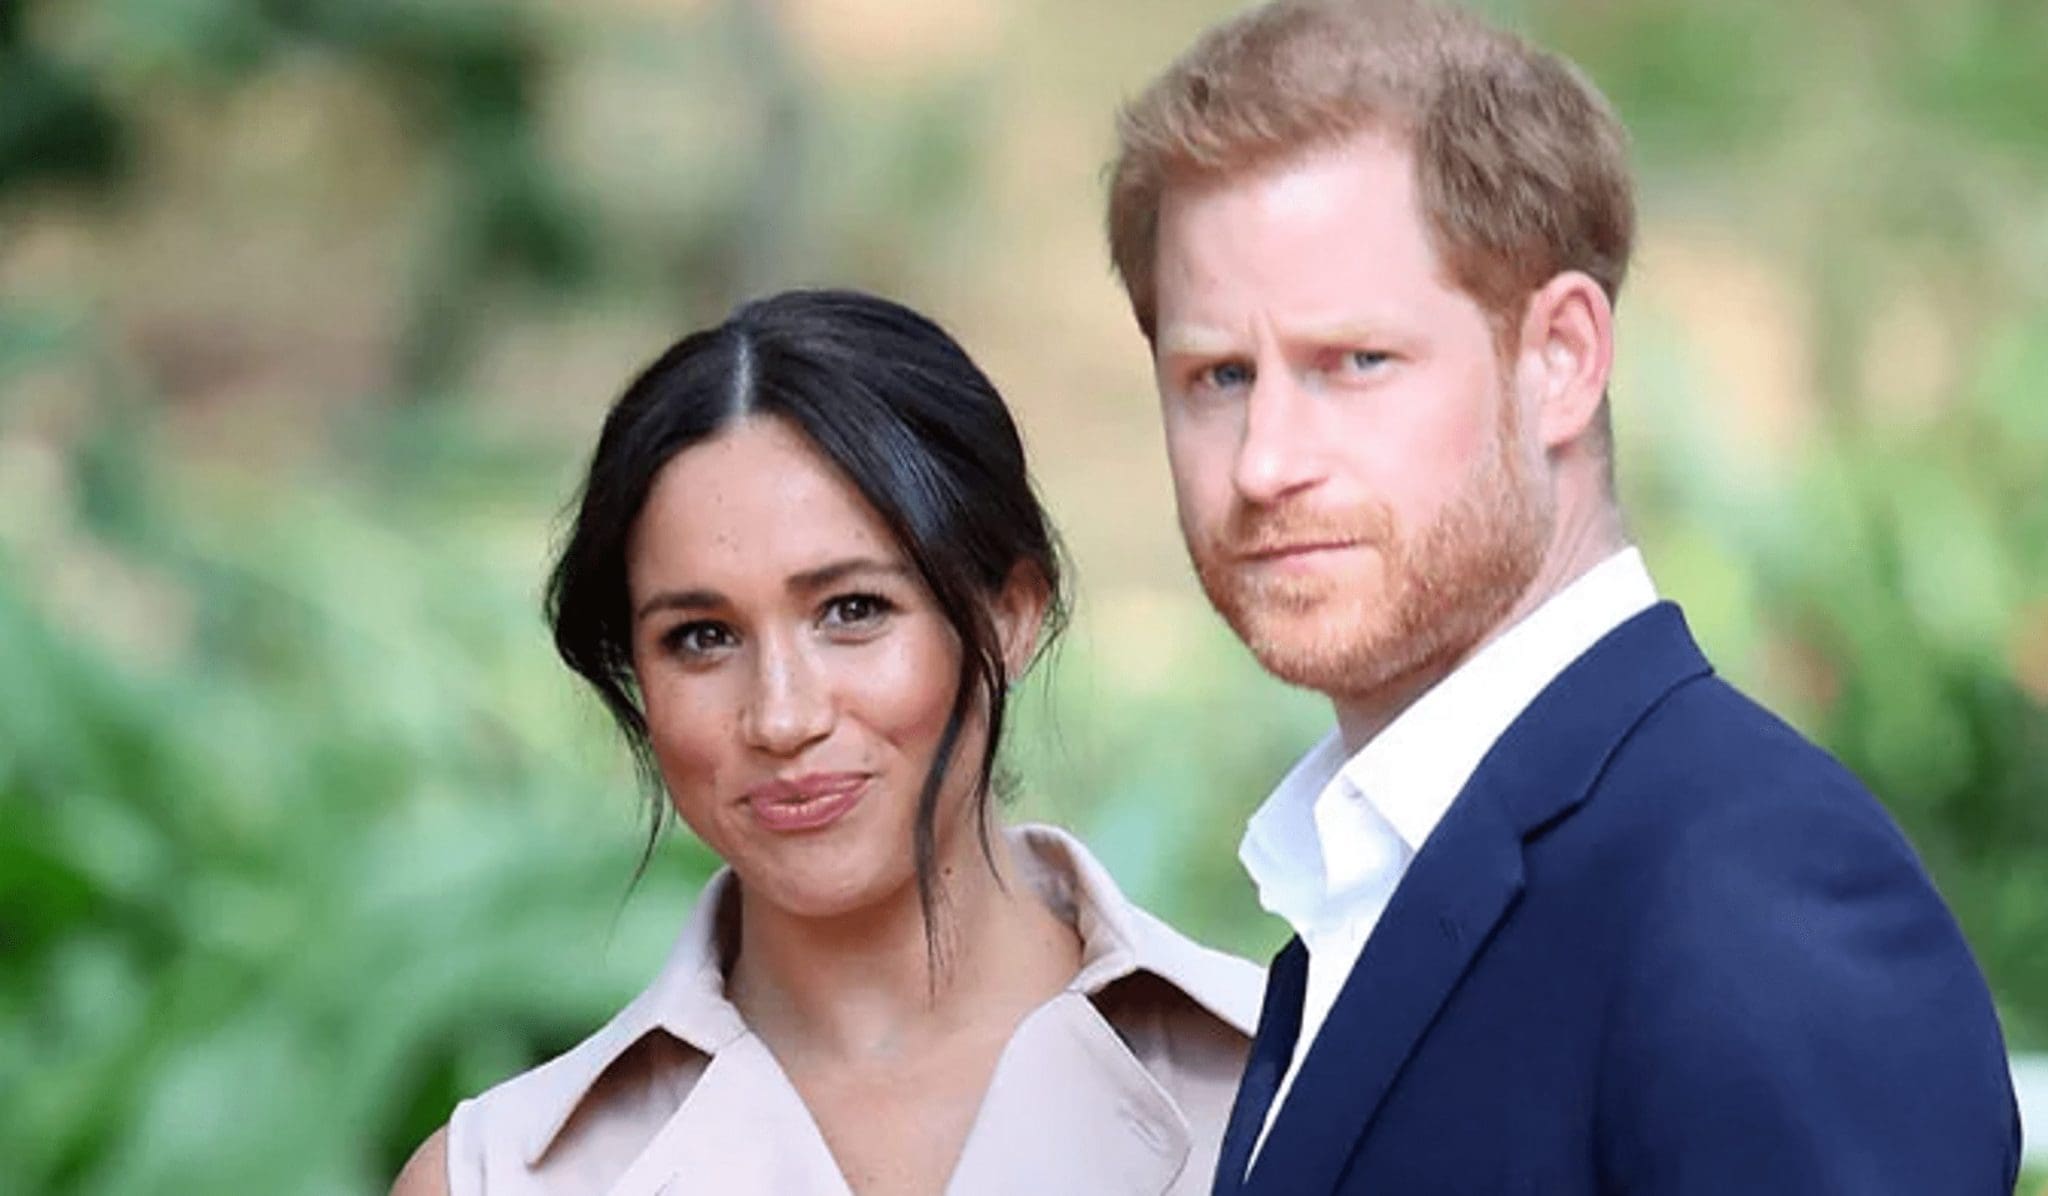 Prince Harry's friend's wife confesses her love to Meghan Markle